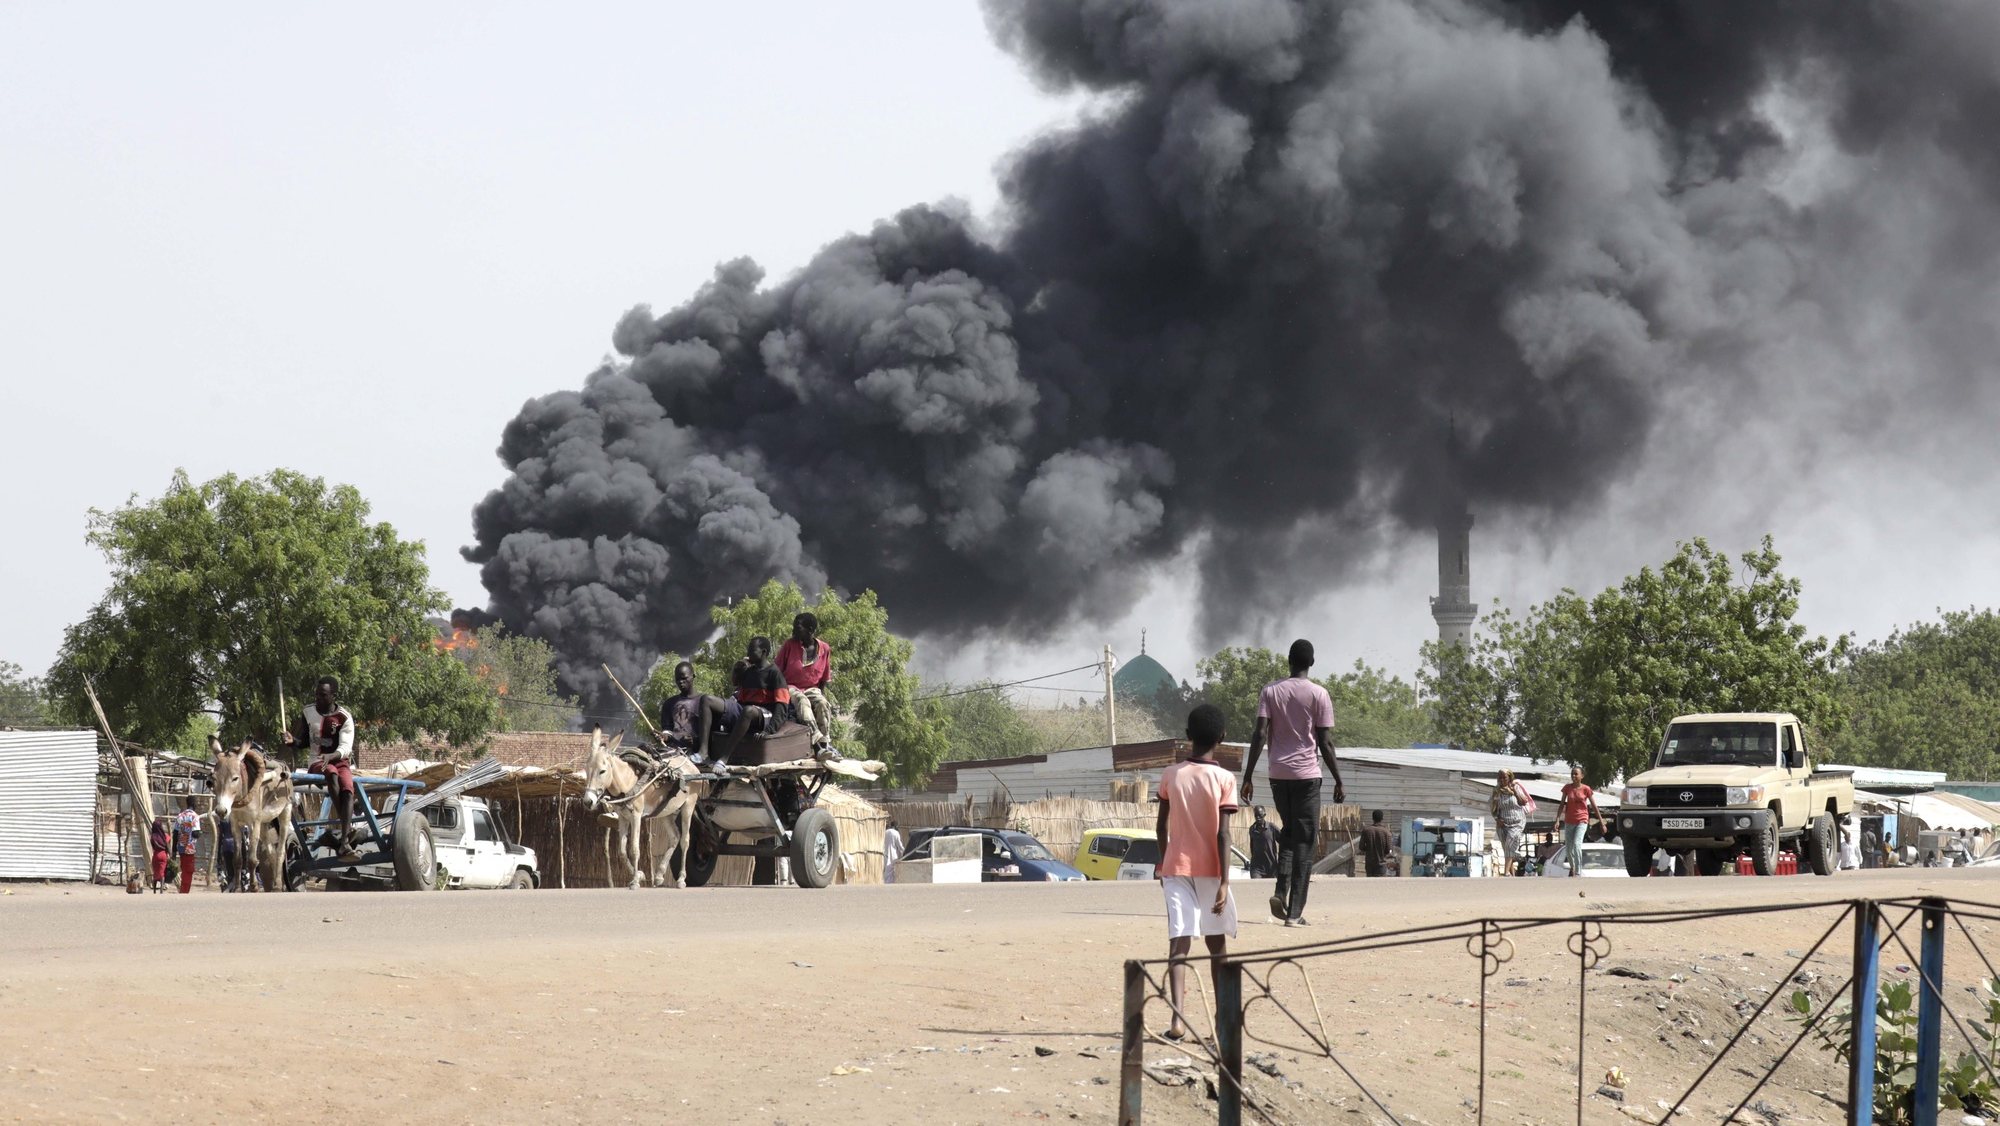 epa10625669 People drive as smoke rises from a fire at a market in the Upper Nile State town of Renk, South Sudan, 13 May 2023. According to UNHCR, at least 40,000 people have arrived into South Sudan since armed clashes between Sudan&#039;s military and rival paramilitary groups began in Khartoum and other parts of the country on 15 April 2023. Most of the refugees are part of the some 800,000 South Sudanese who had previously fled the war in South Sudan and who are now returning to a country with tensions still remaining in many areas, and more than two million internally displaced people. Upon arriving at the Joda border crossing, the refugees head to a transit area set up by UNHCR in the small town of Renk, where various UN agencies assist them with registration, food, health check and logistics.  EPA/AMEL PAIN